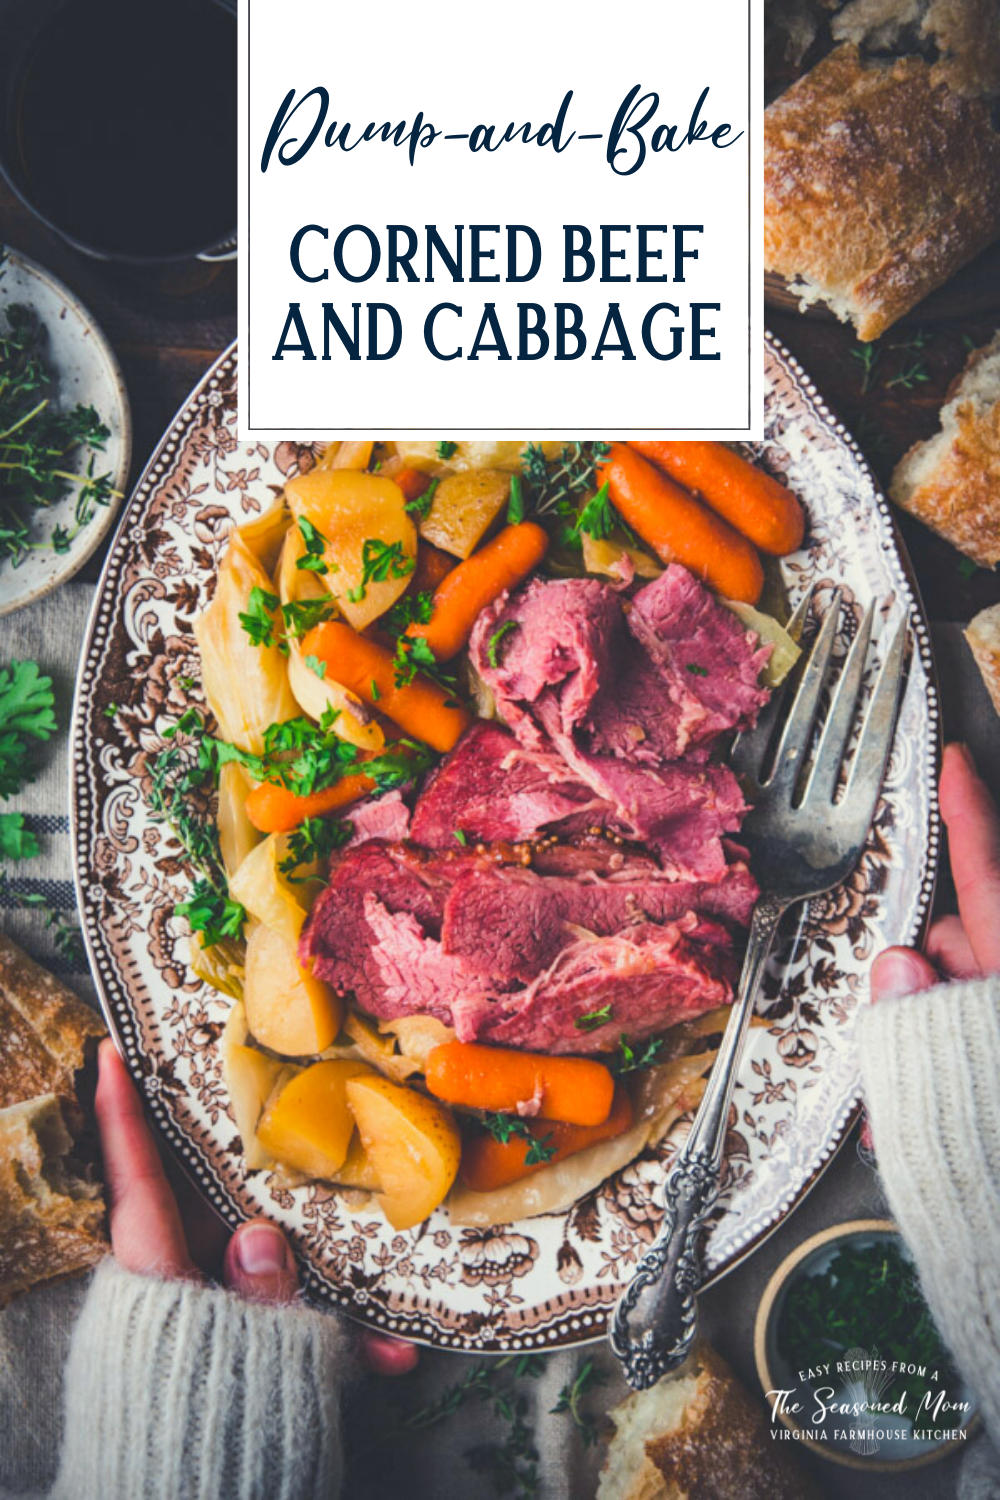 Overhead shot of hands holding a platter of corned beef and cabbage with text title overlay